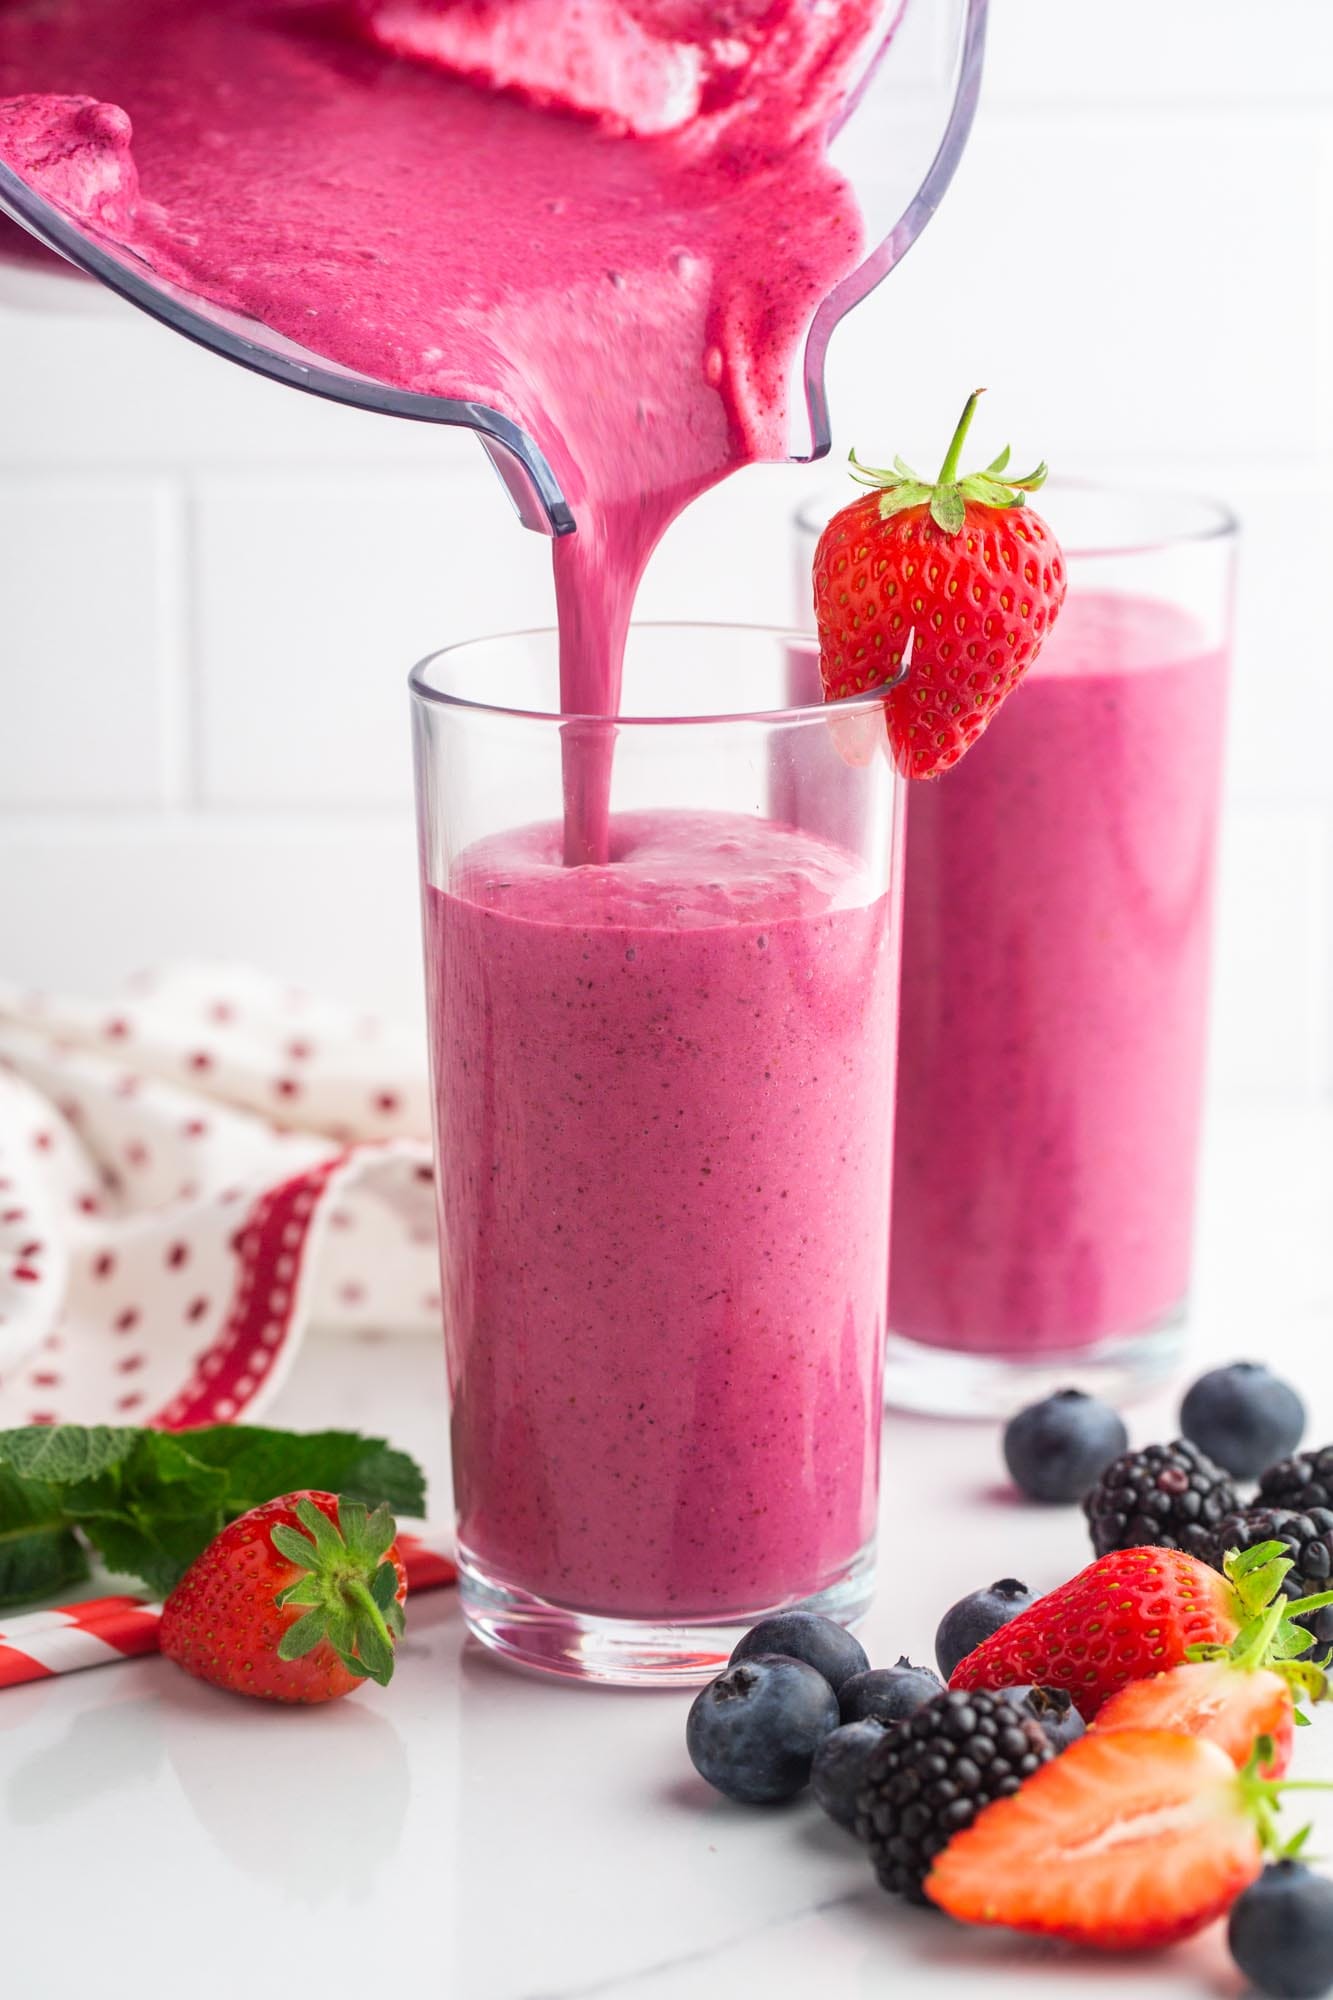 Pouring pink berry smoothie from a blender jug into a glass